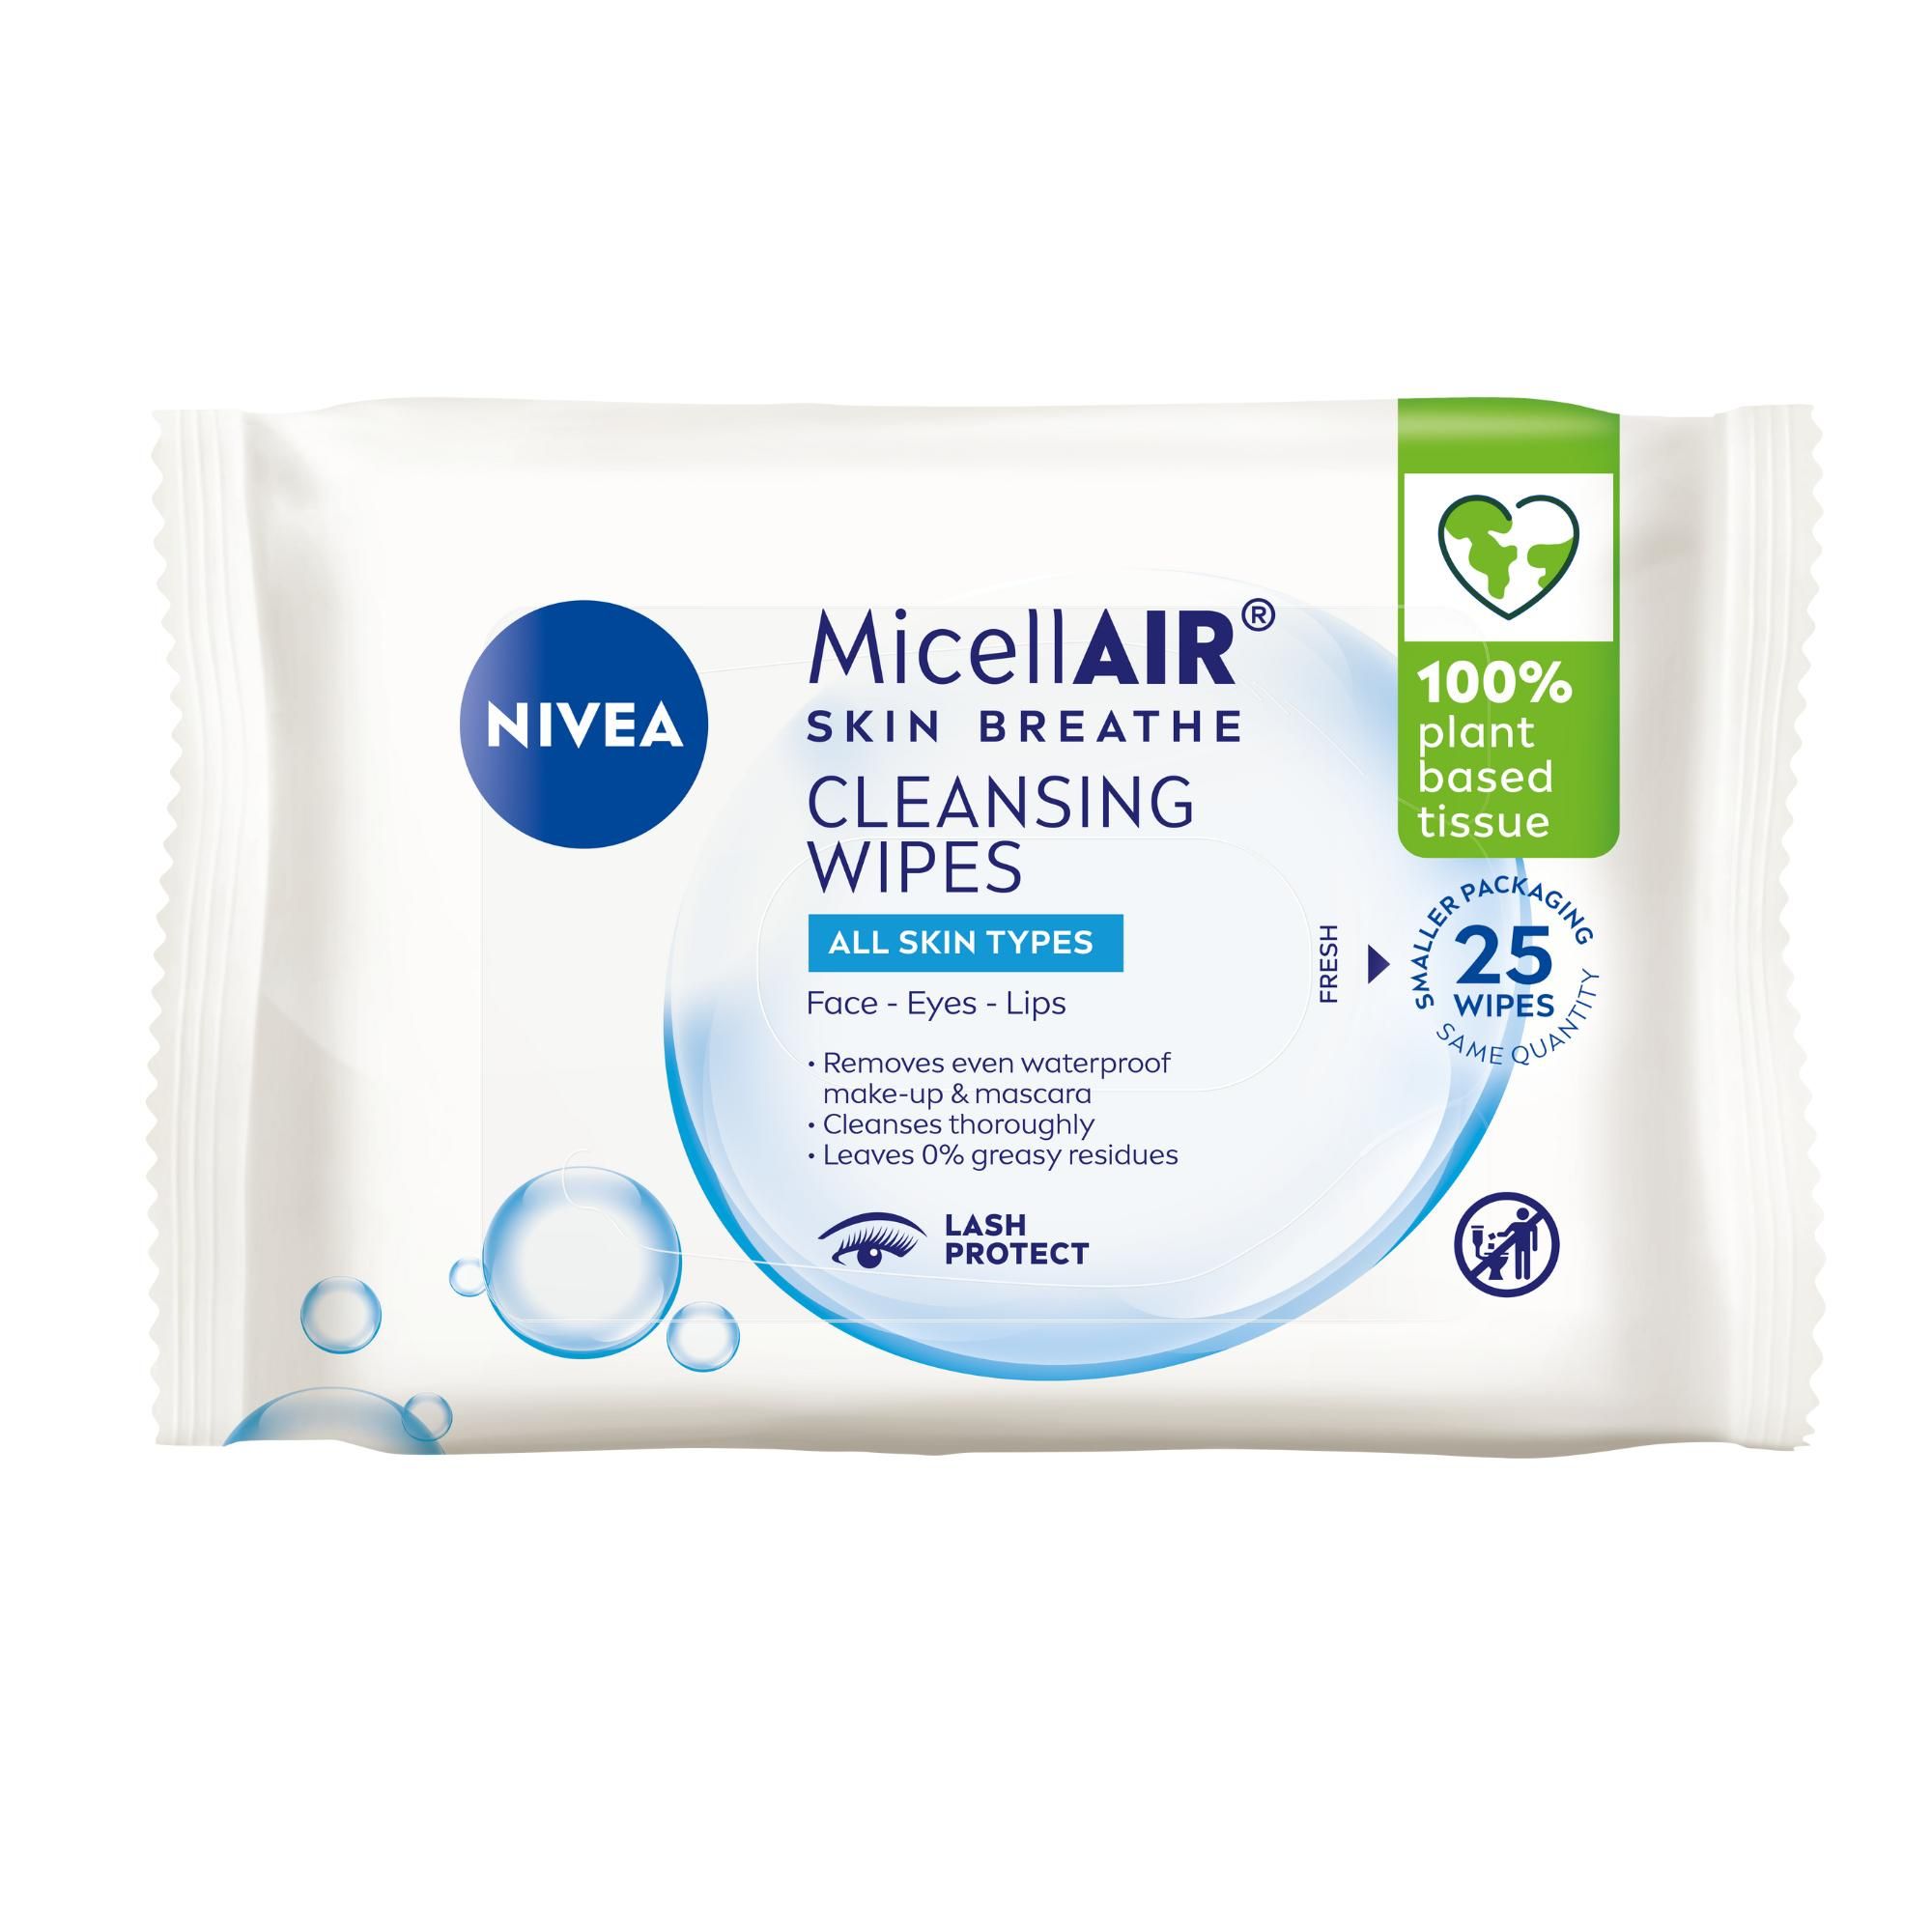 Vita Citral 3 in 1 Disinfectant Wipes 12 Wipes 